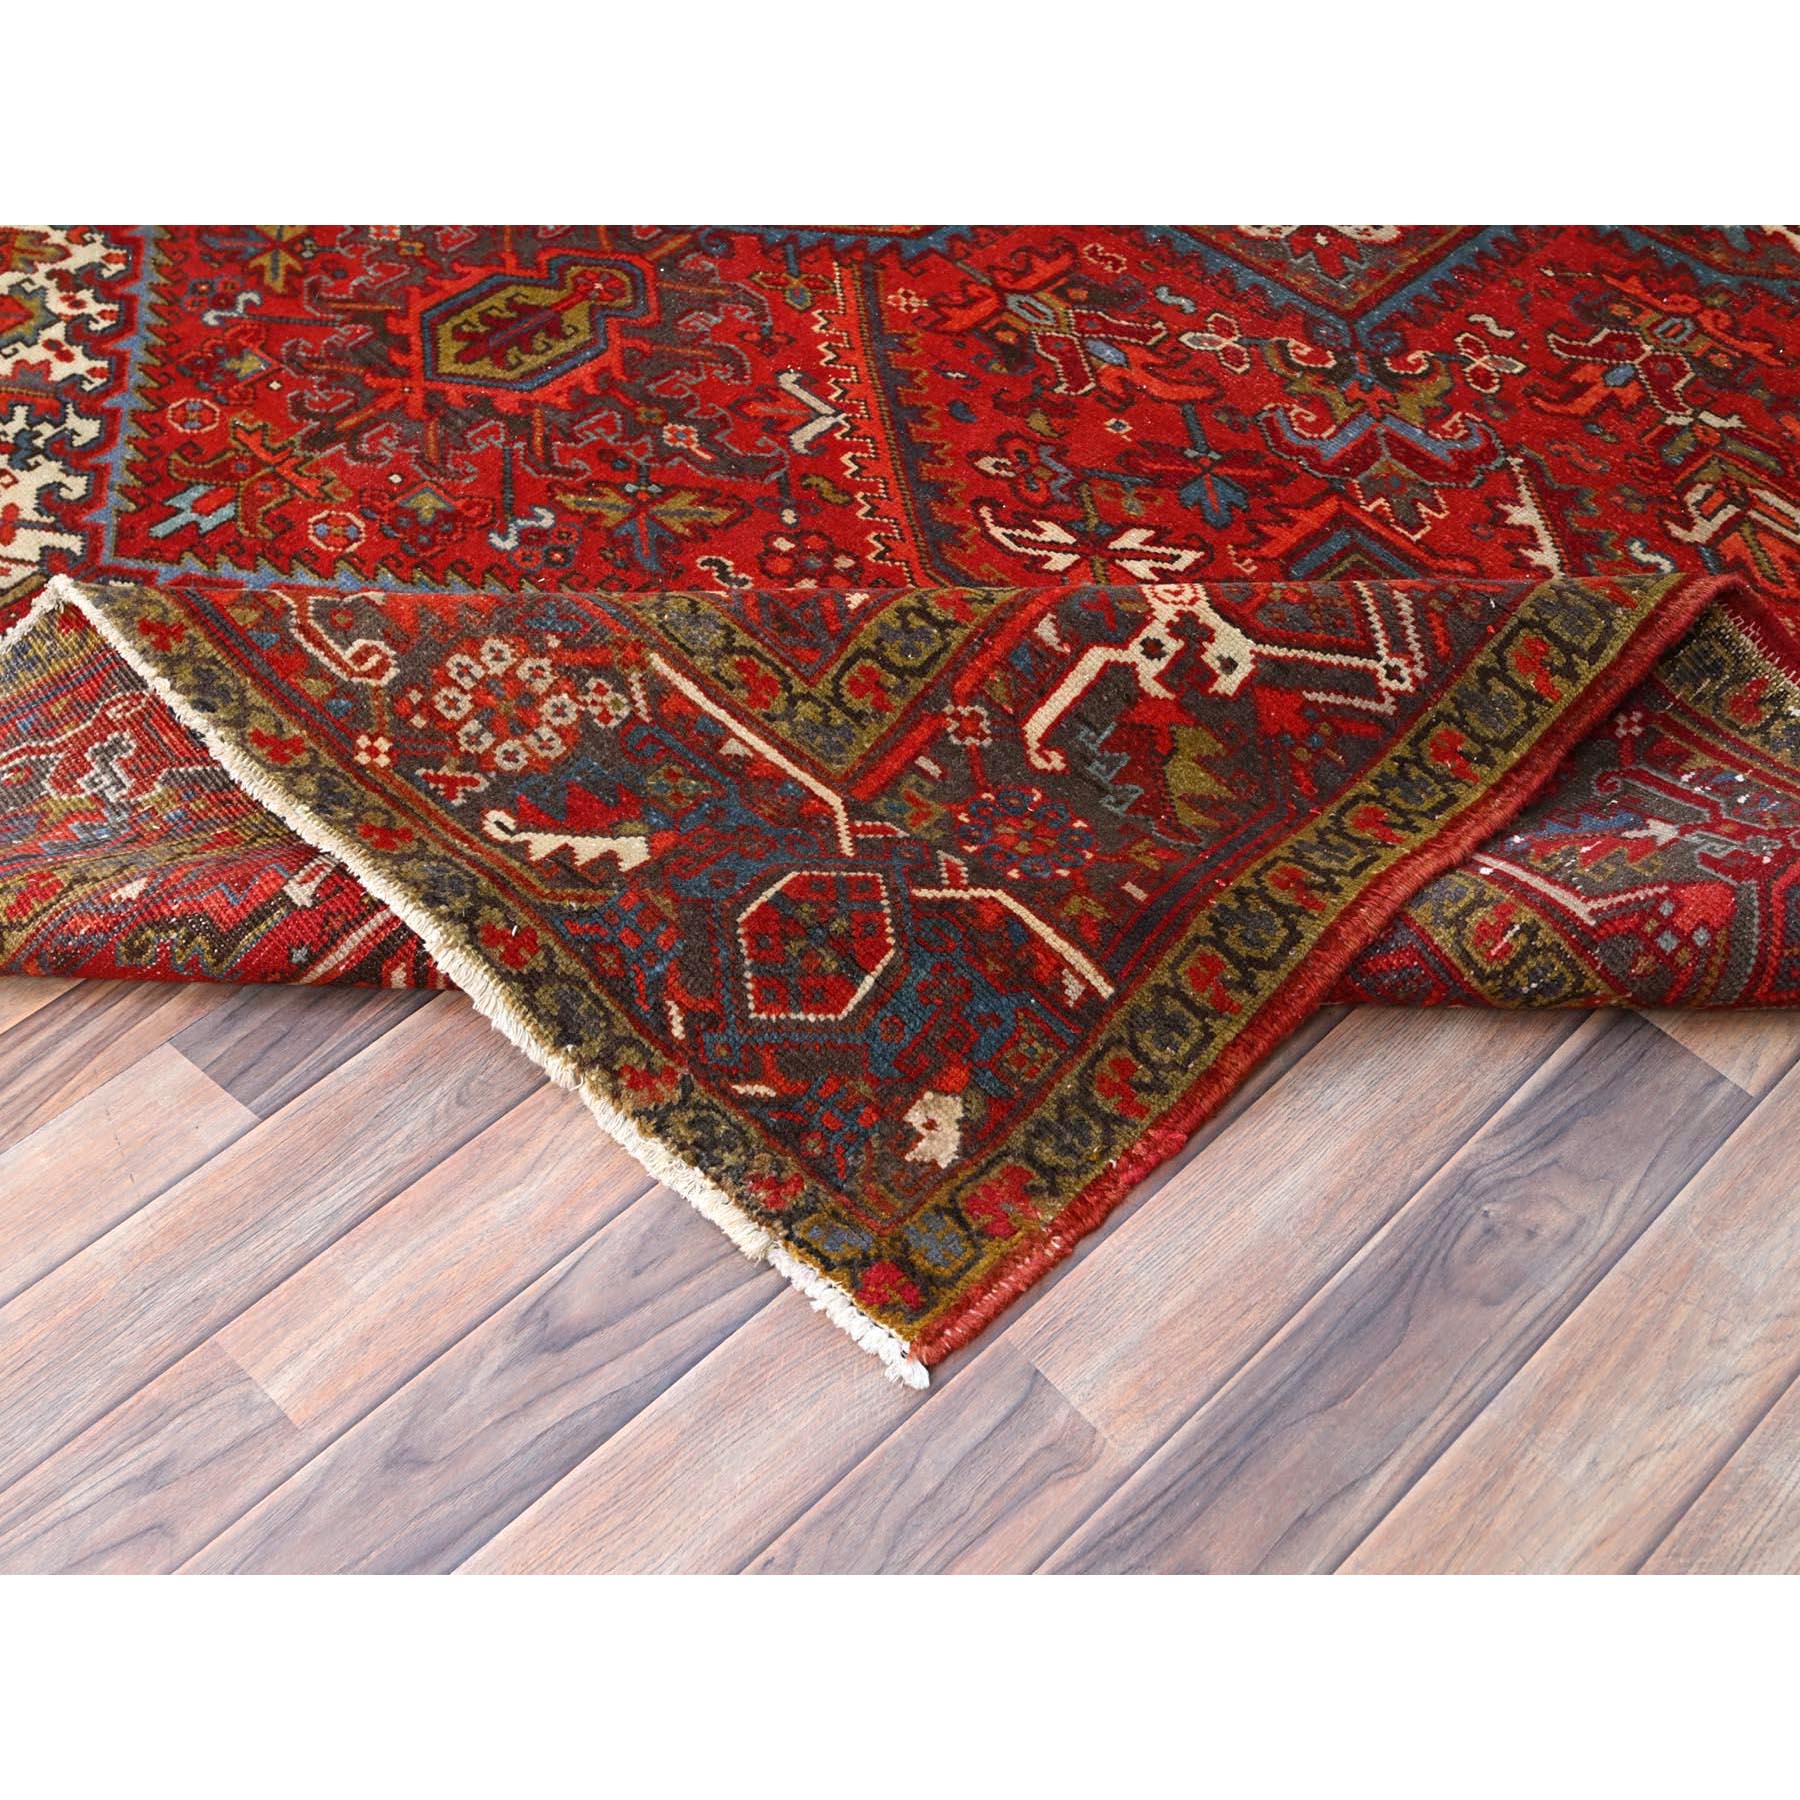 8'4"x10'10" Crimson Red, Good Condition, Distressed Feel, Evenly Worn, Pure Wool, Hand Woven, Vintage Persian Heriz with Geometric Pattern, Oriental Rug 